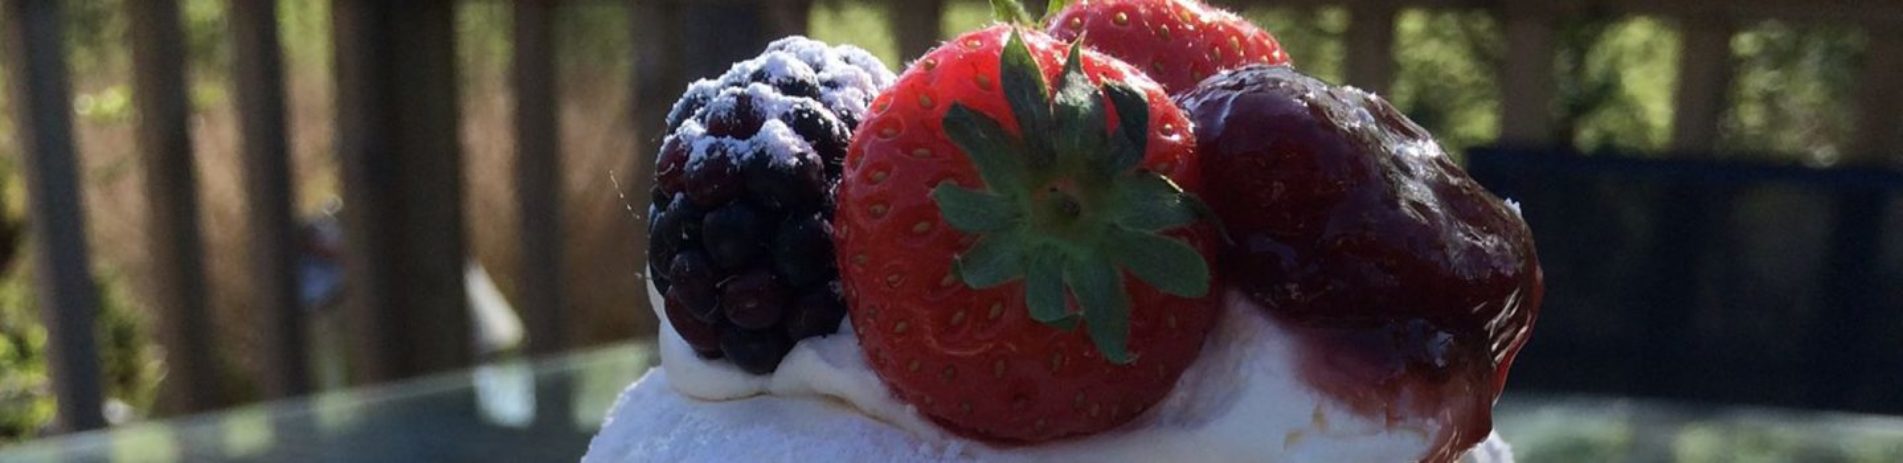 meringue-topped-with-berries-on-table-outside